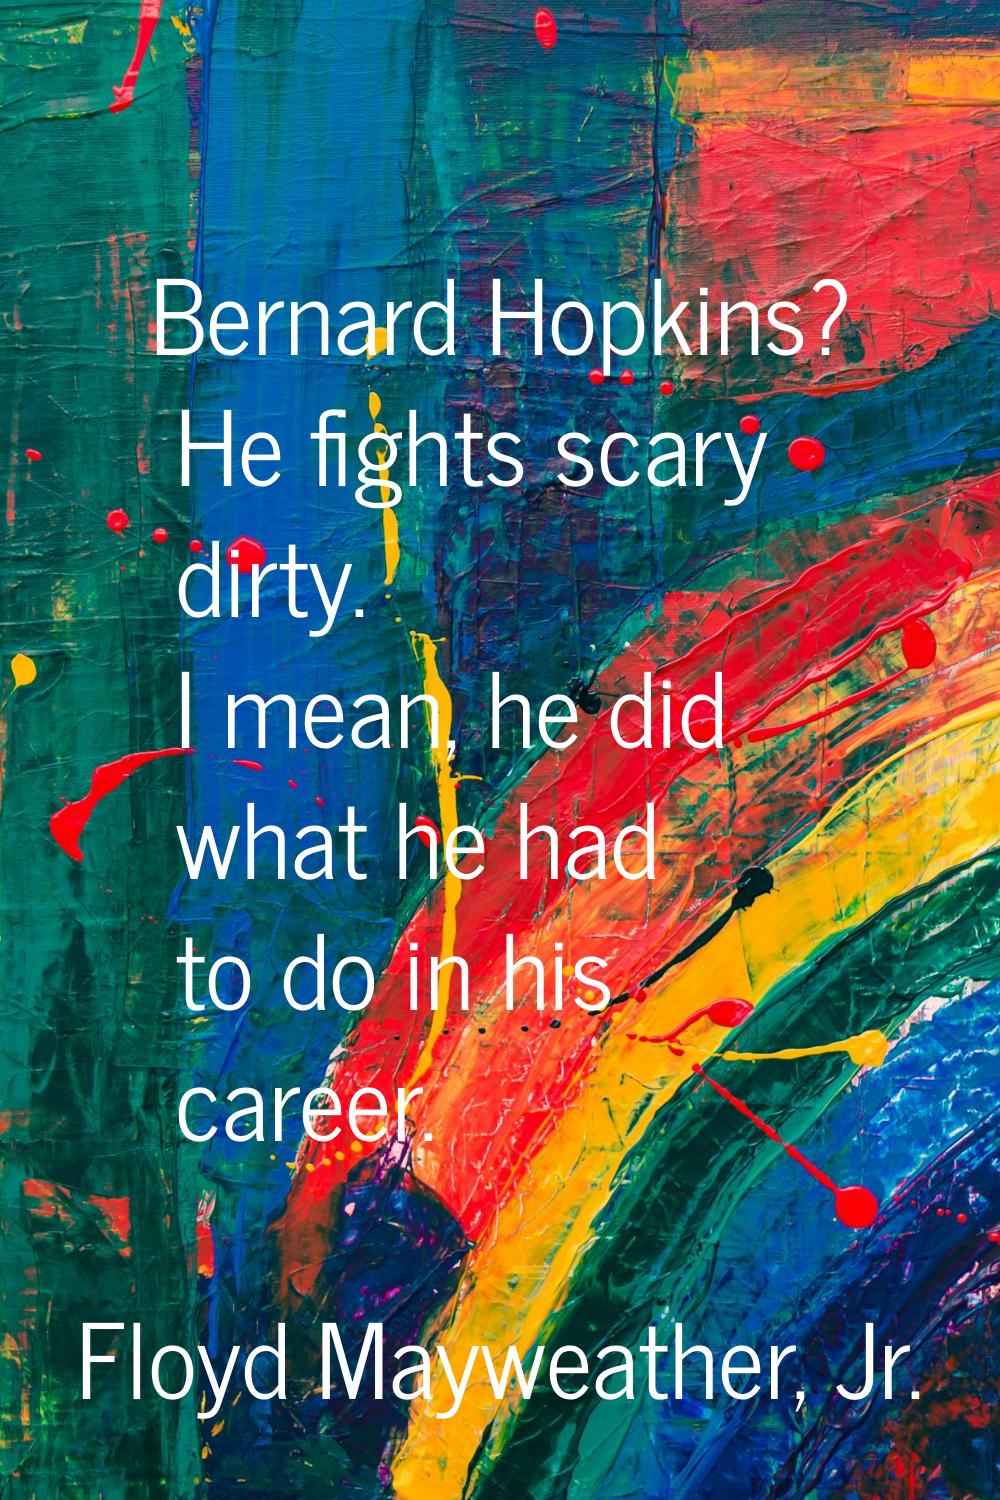 Bernard Hopkins? He fights scary dirty. I mean, he did what he had to do in his career.